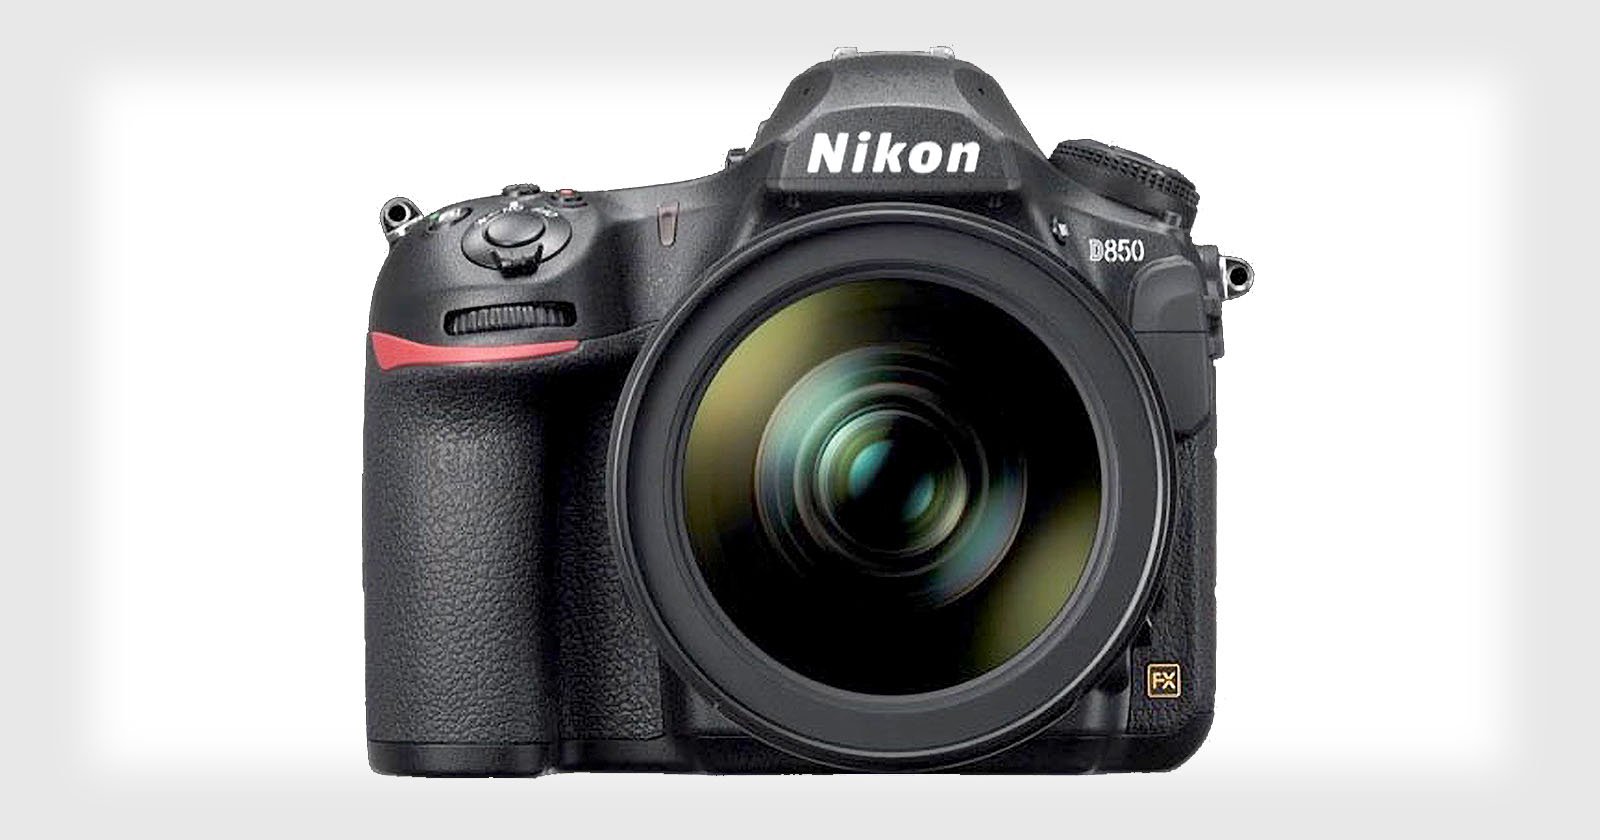 Nikon D850 Slides Leak: Here Are the Confirmed Specs and Features